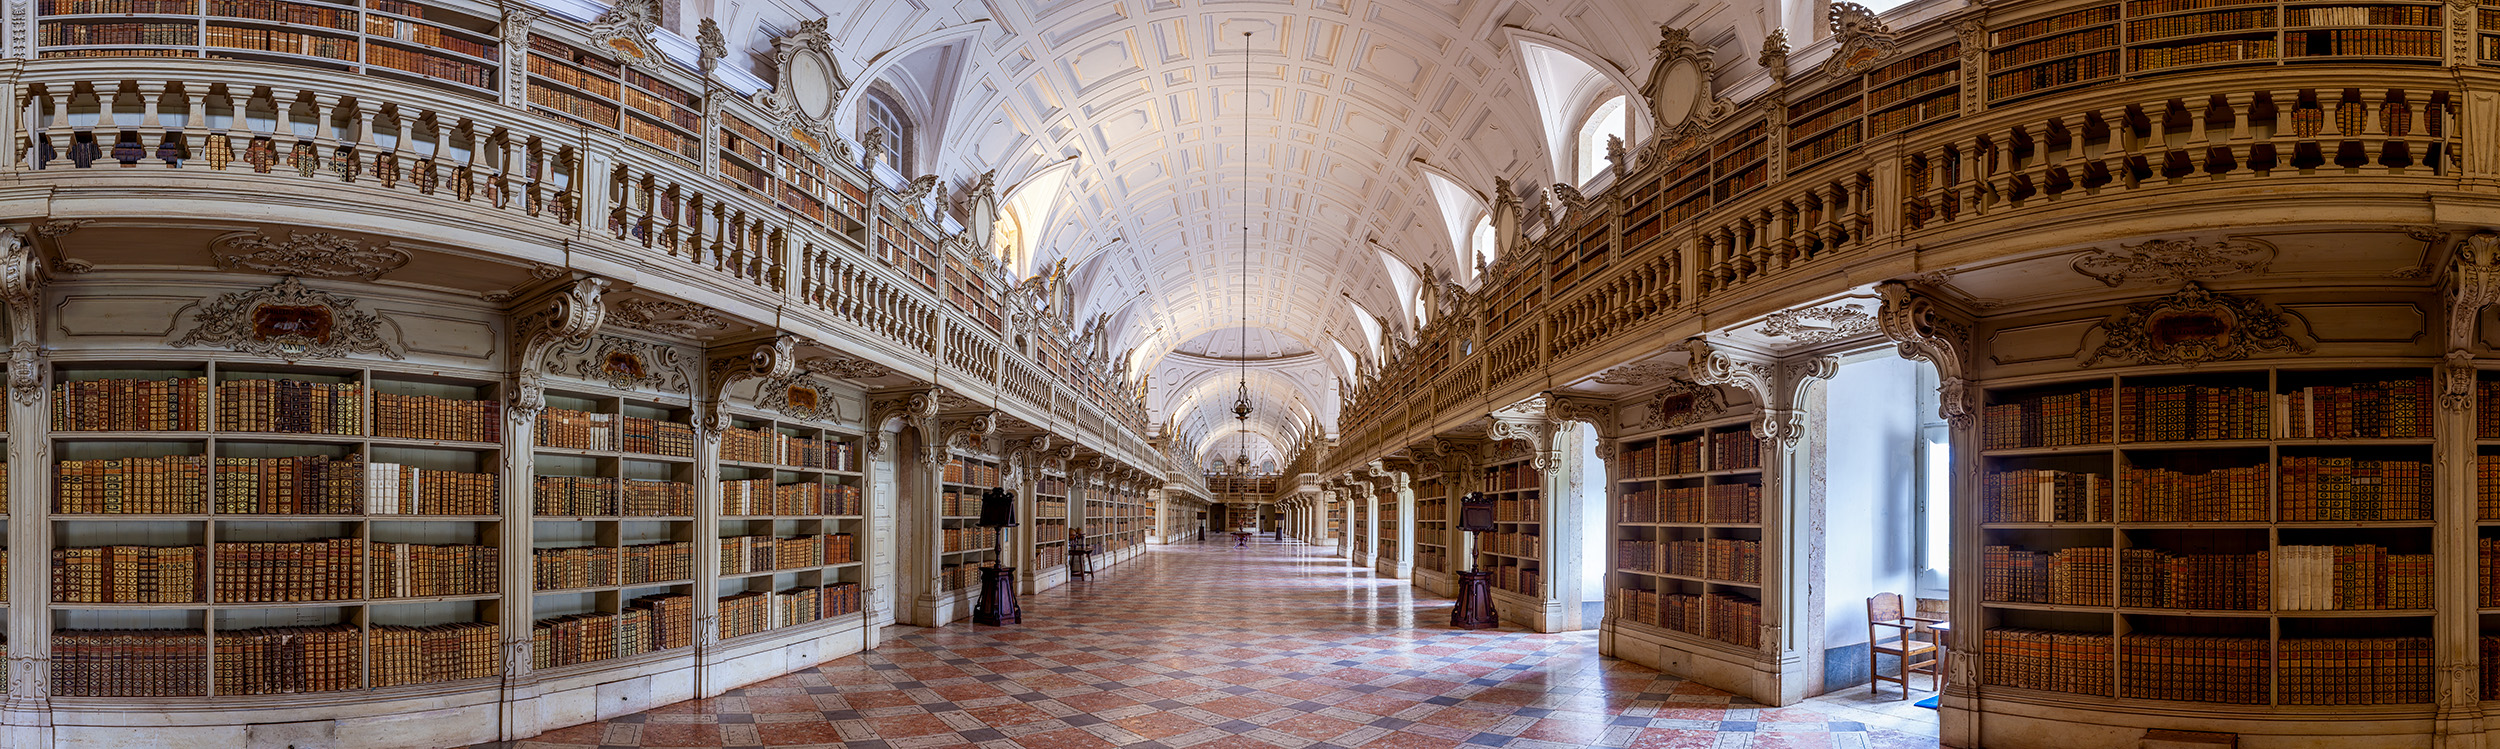 The Mafra Library, housed within this magnificent palace/monastery, is truly breathtaking. Capturing this awe-inspiring scene...